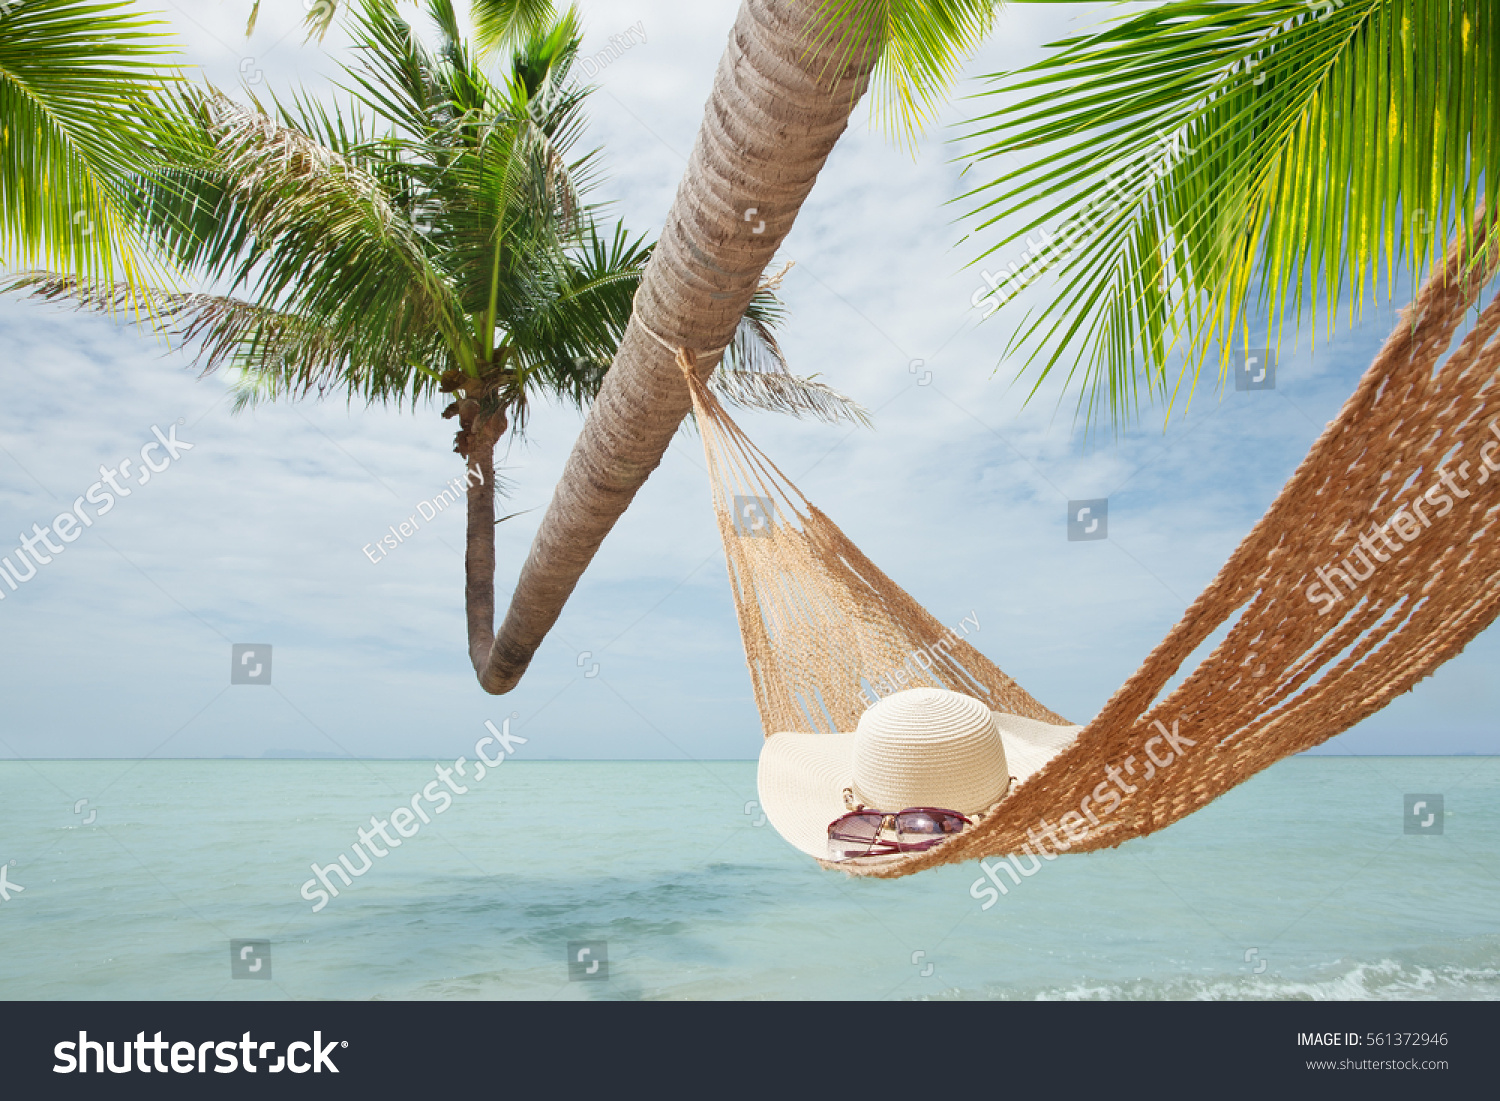 view of nice hummock with palms around in tropical environment #561372946